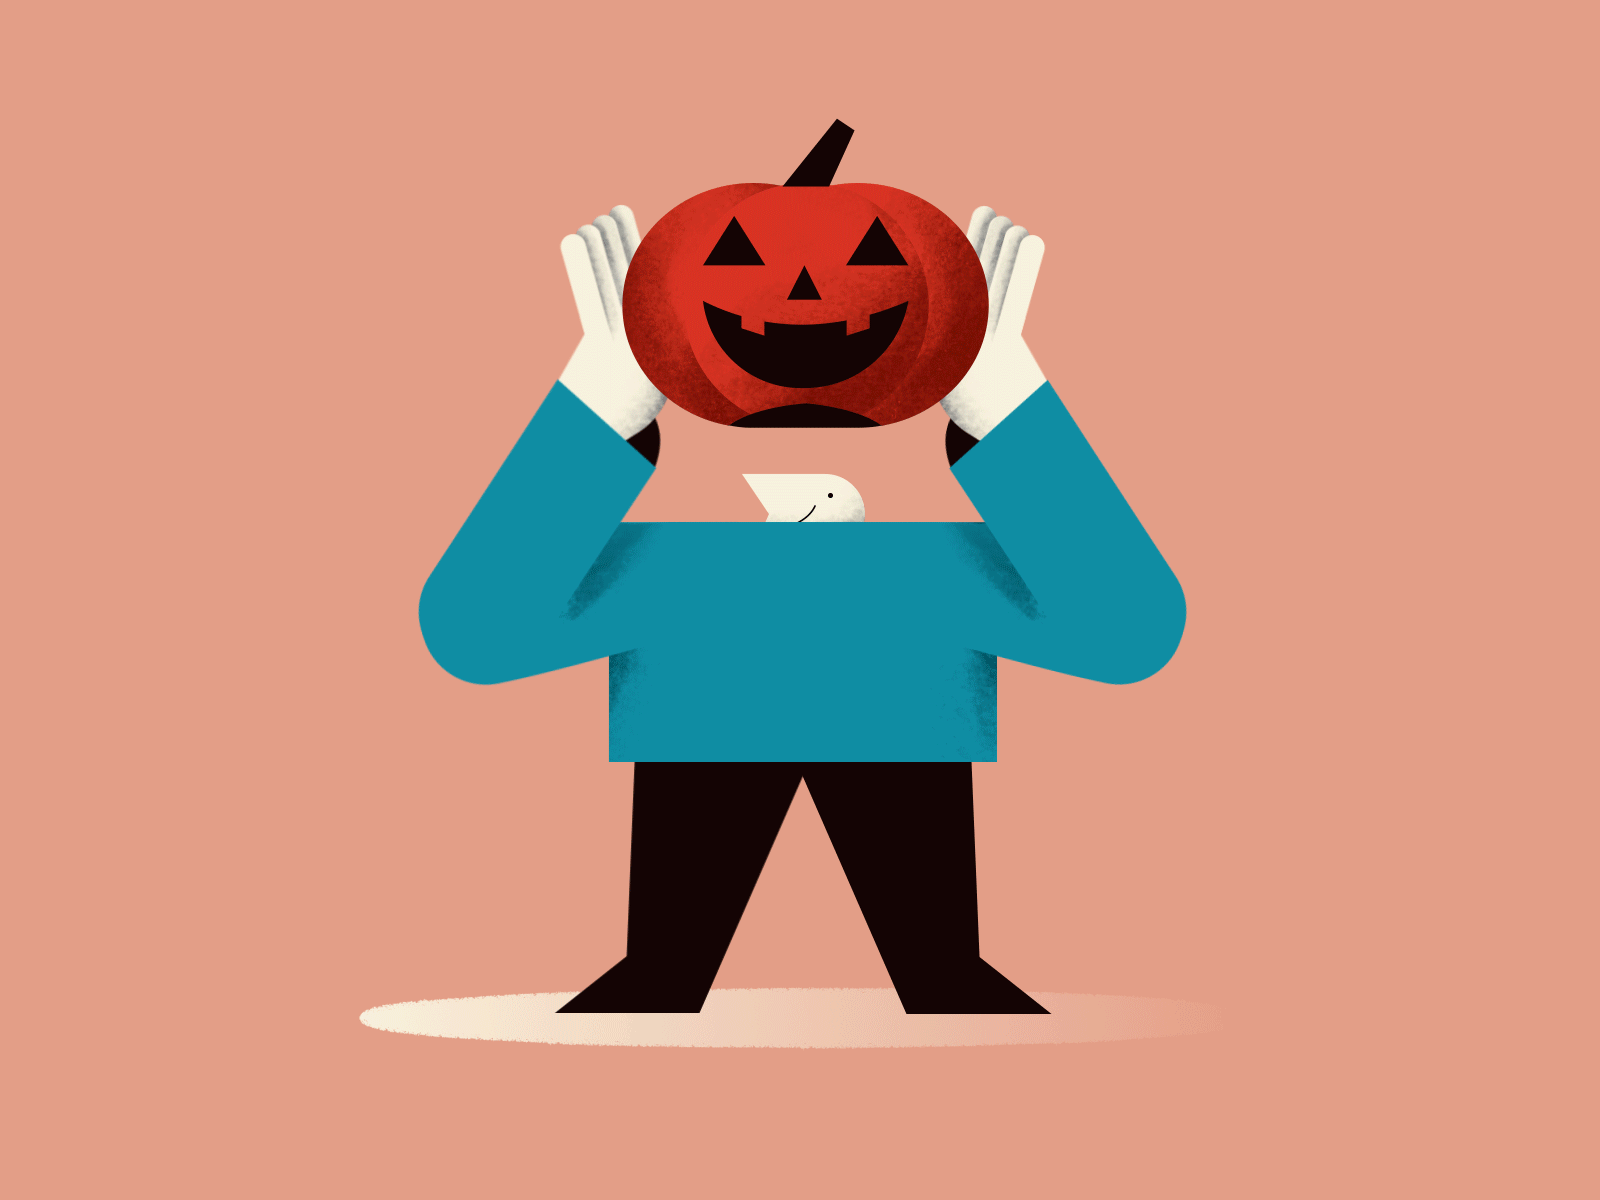 Trick or Treat affinity affinitydesigner aftereffects animation art character colored digital dribbble duik flat gif halloween holiday illustration motion pumpkin serif vector